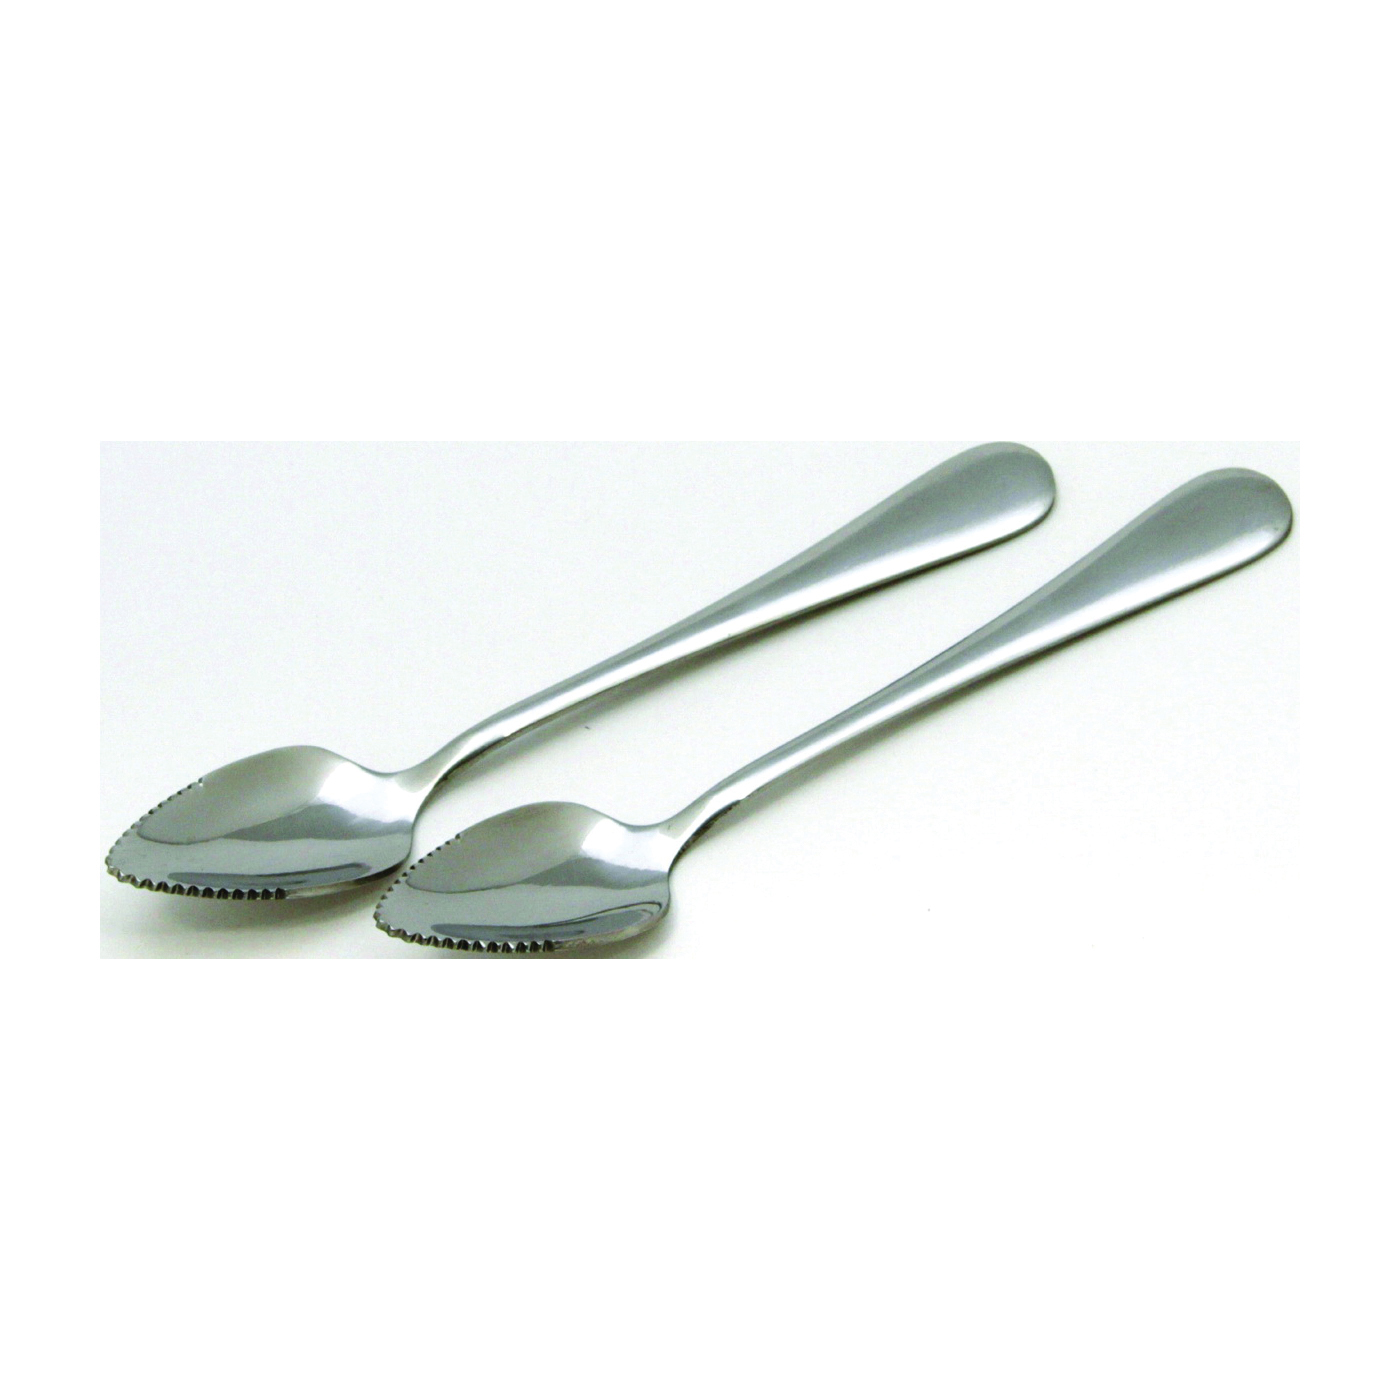 21521 Grapefruit Spoon Set, 7 in OAL, Stainless Steel, Polished Mirror